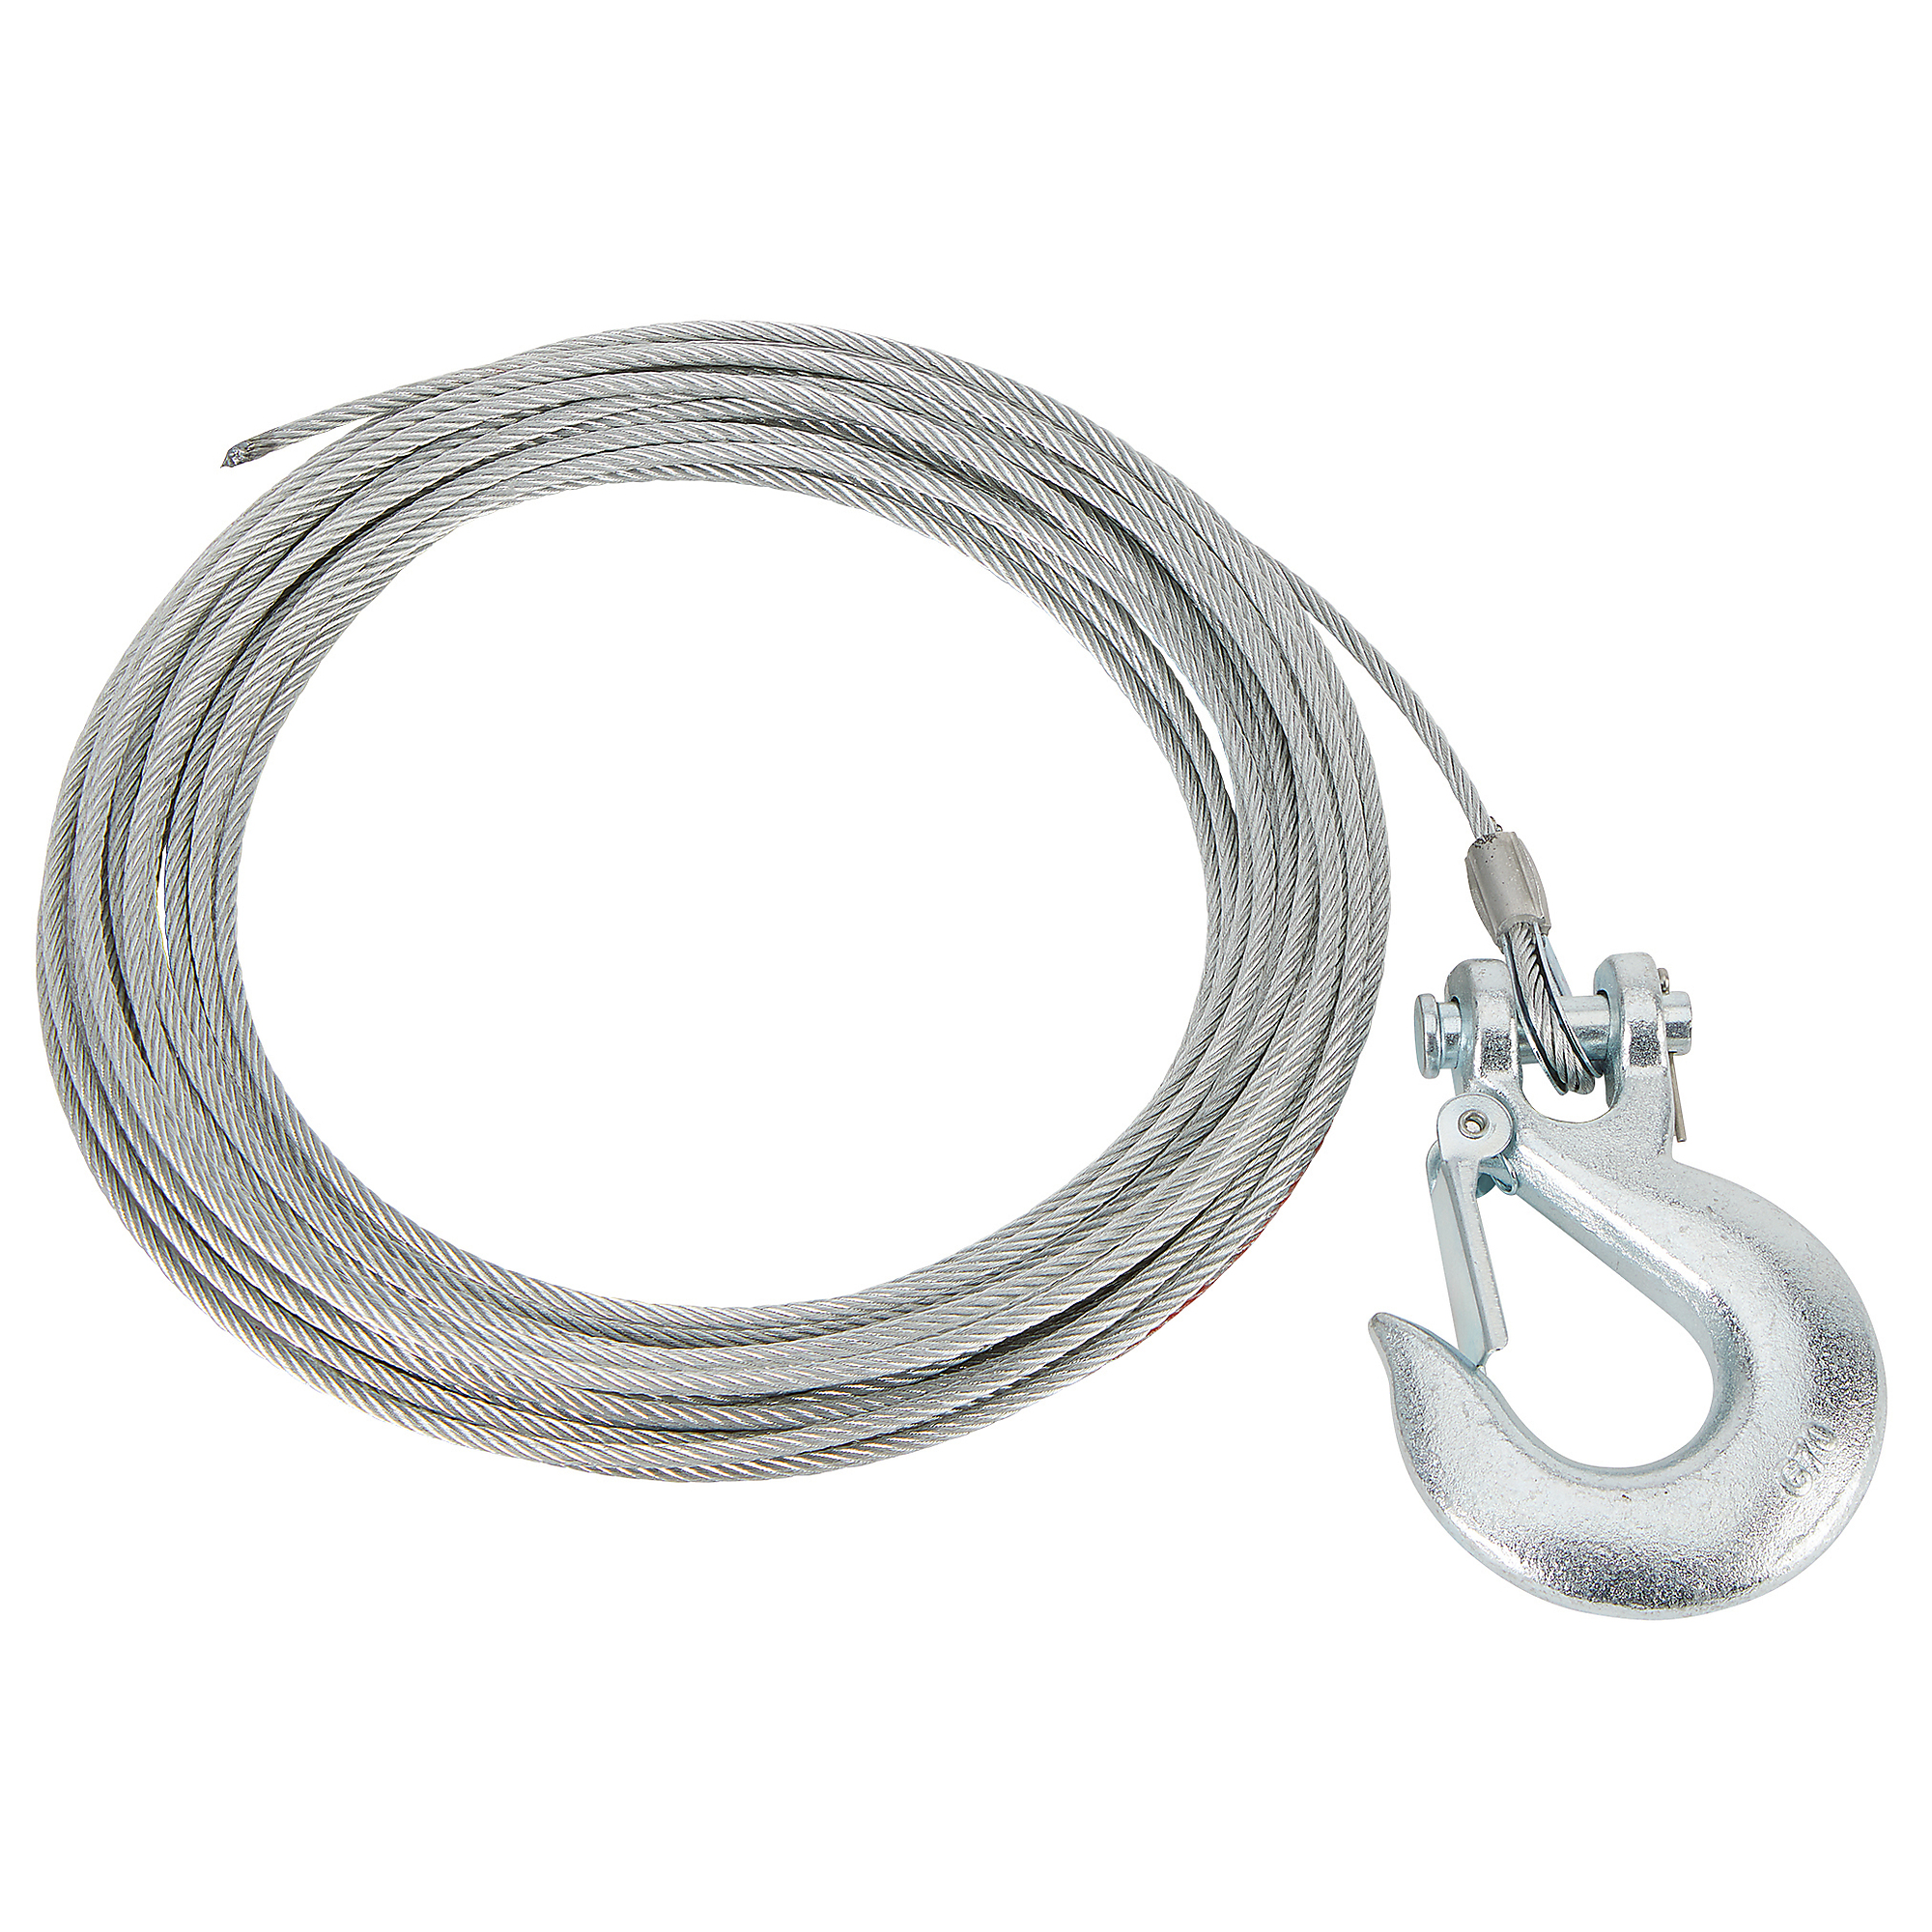 Ultra-Tow Wire ATV Winch Rope with Hook, 5/32in. dia. x 50ft.L